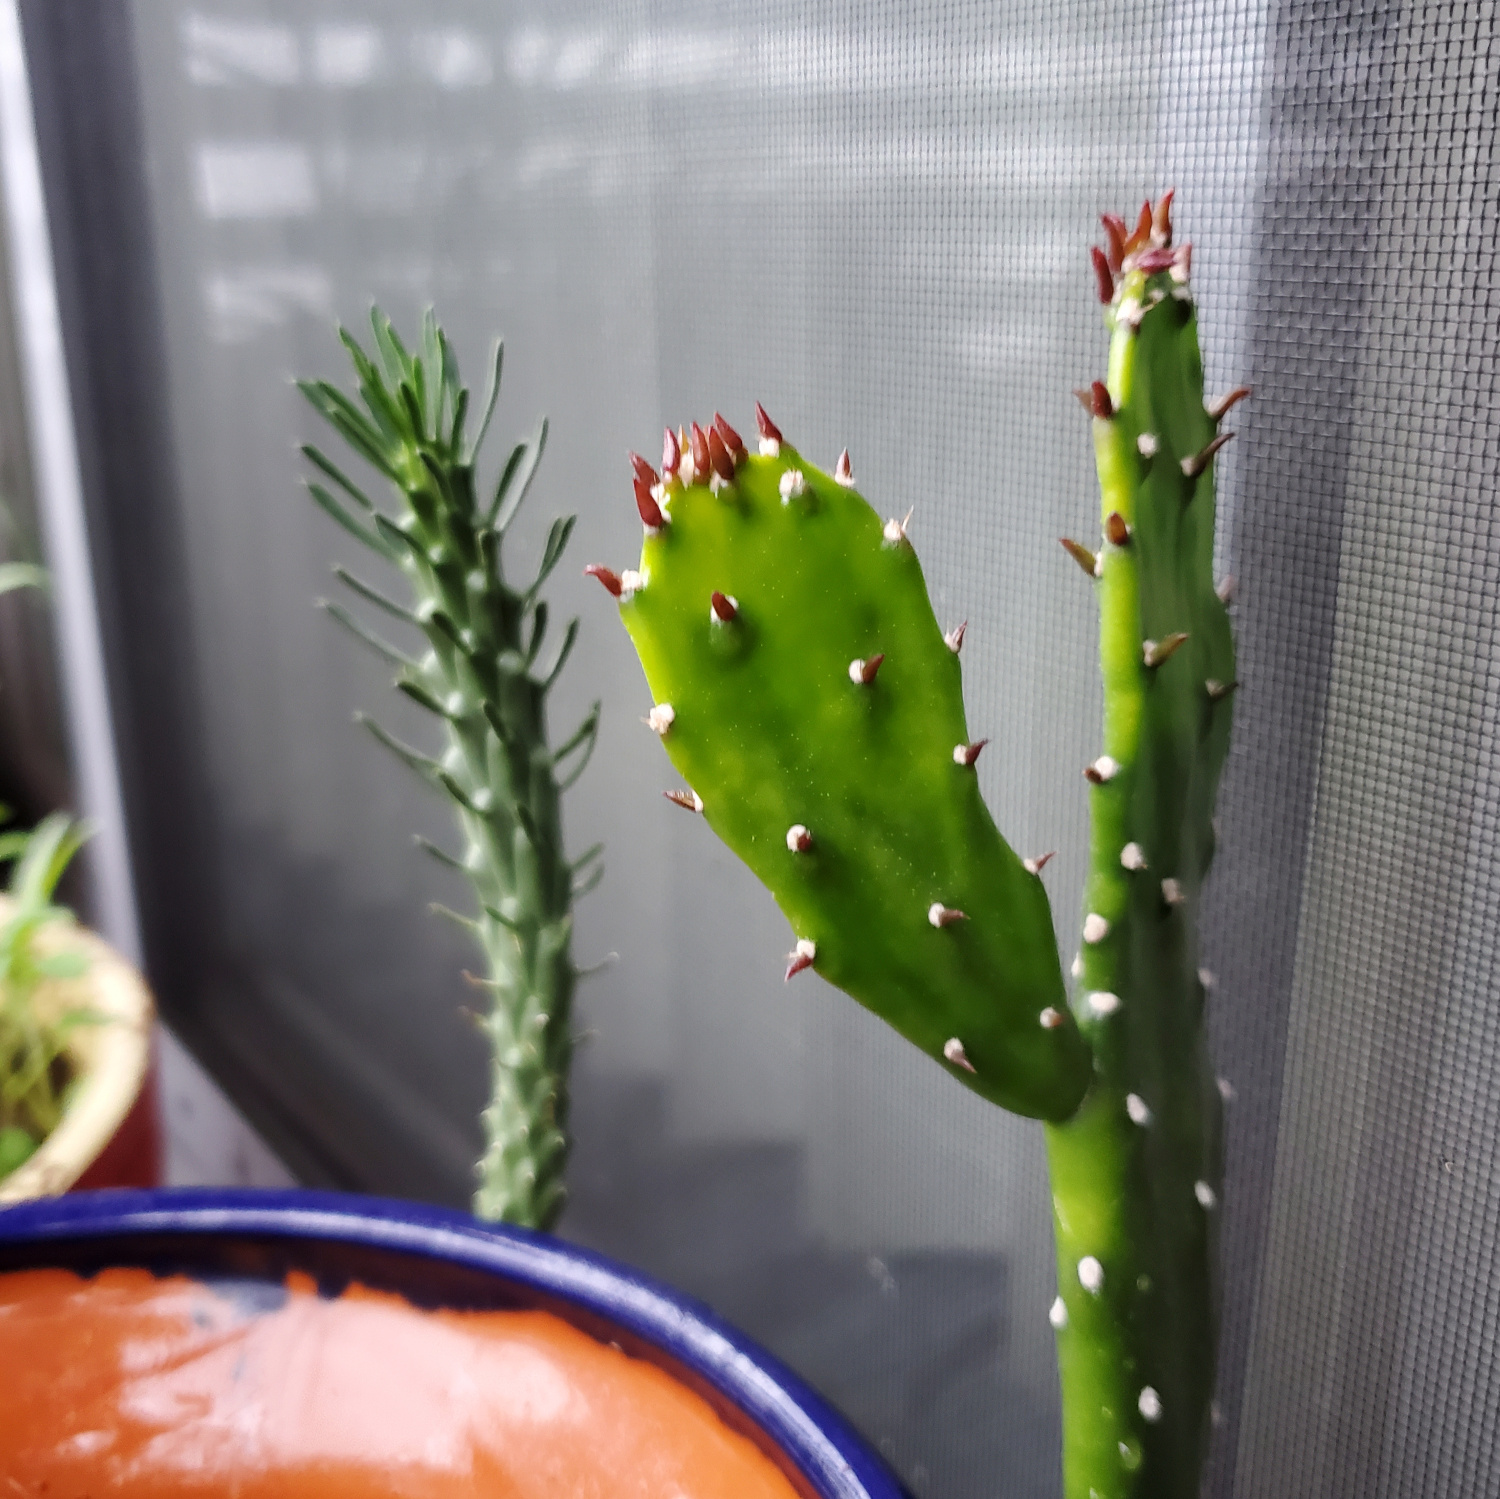 The cactus is growing a new arm!